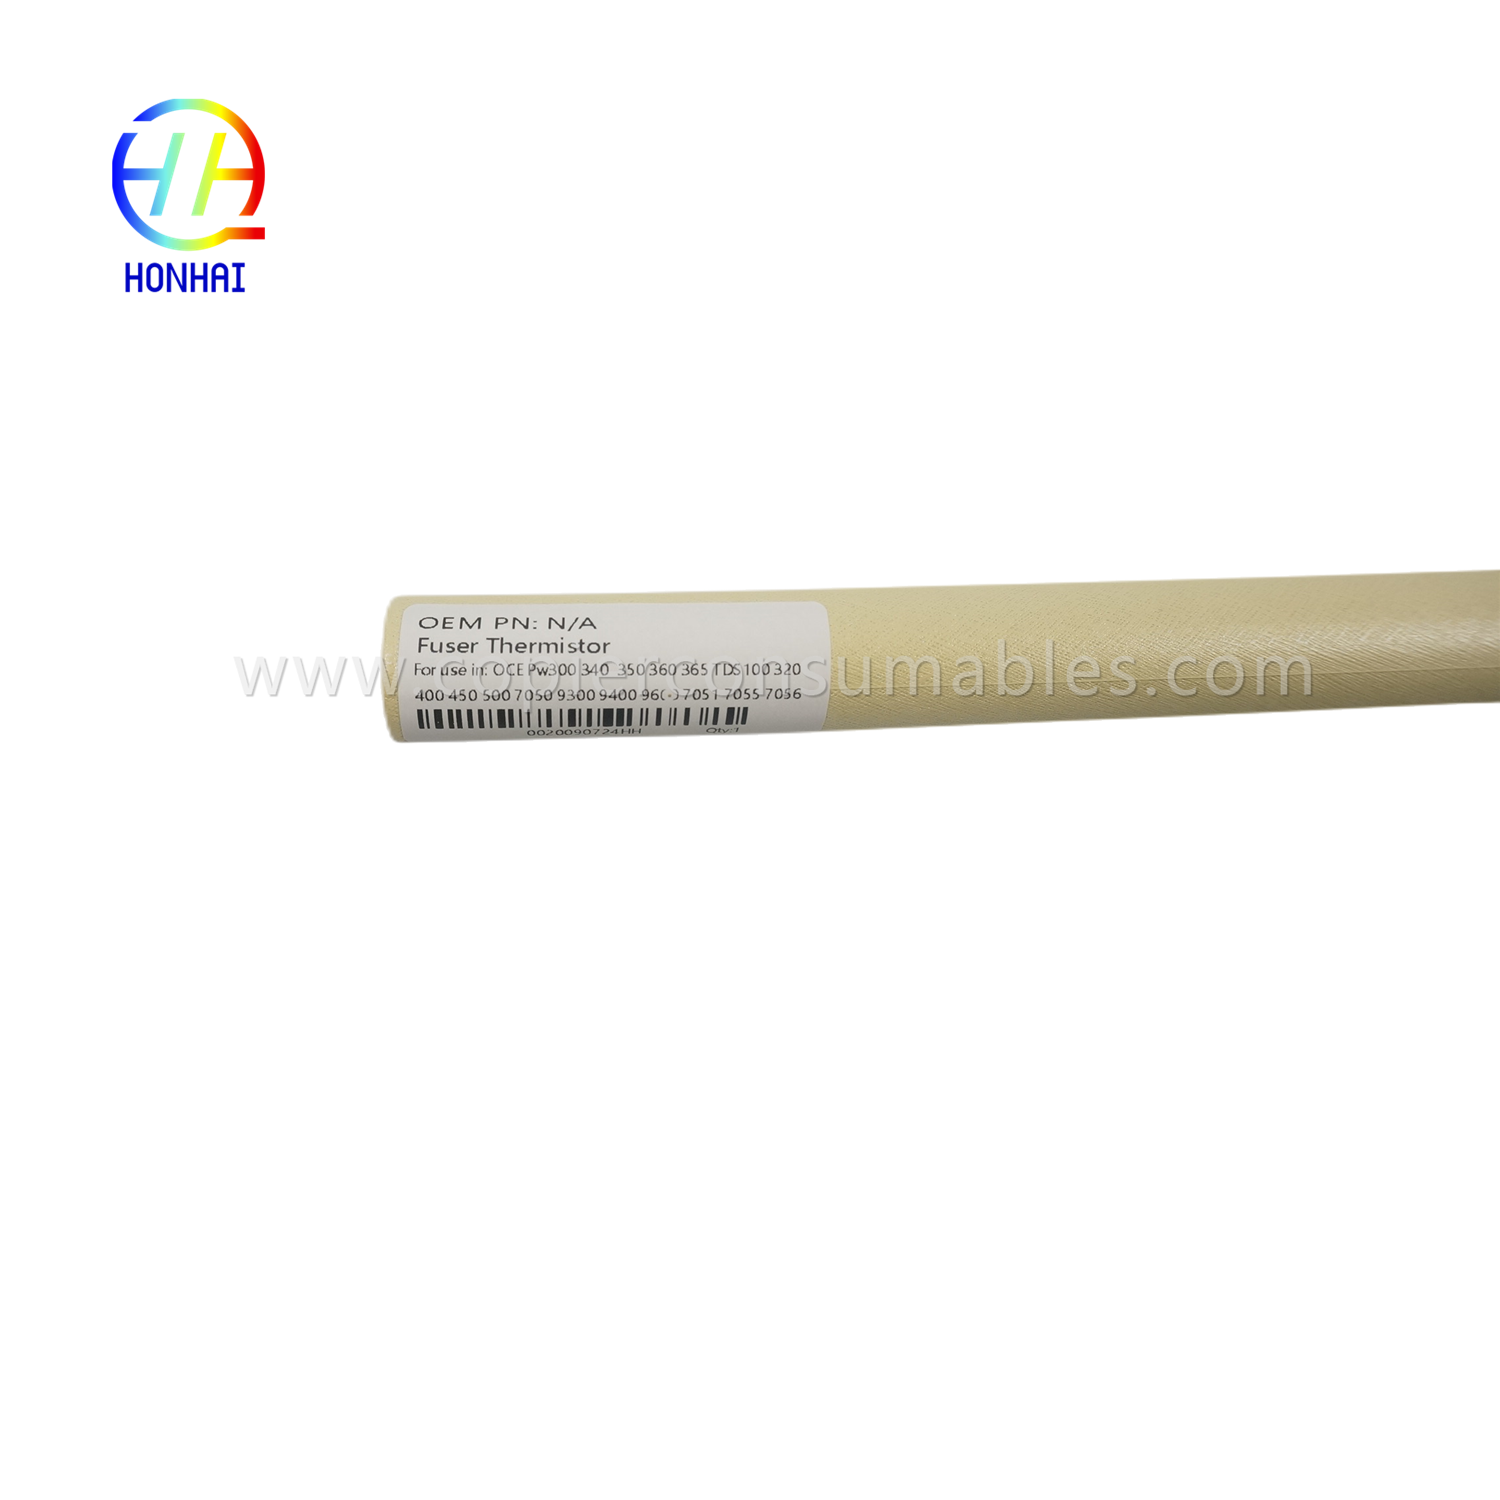 Fuser Thermistor  for OCE Pw300 340 350 360 365 TDS100 320 400 450 500 7050 9300 9400 (3)